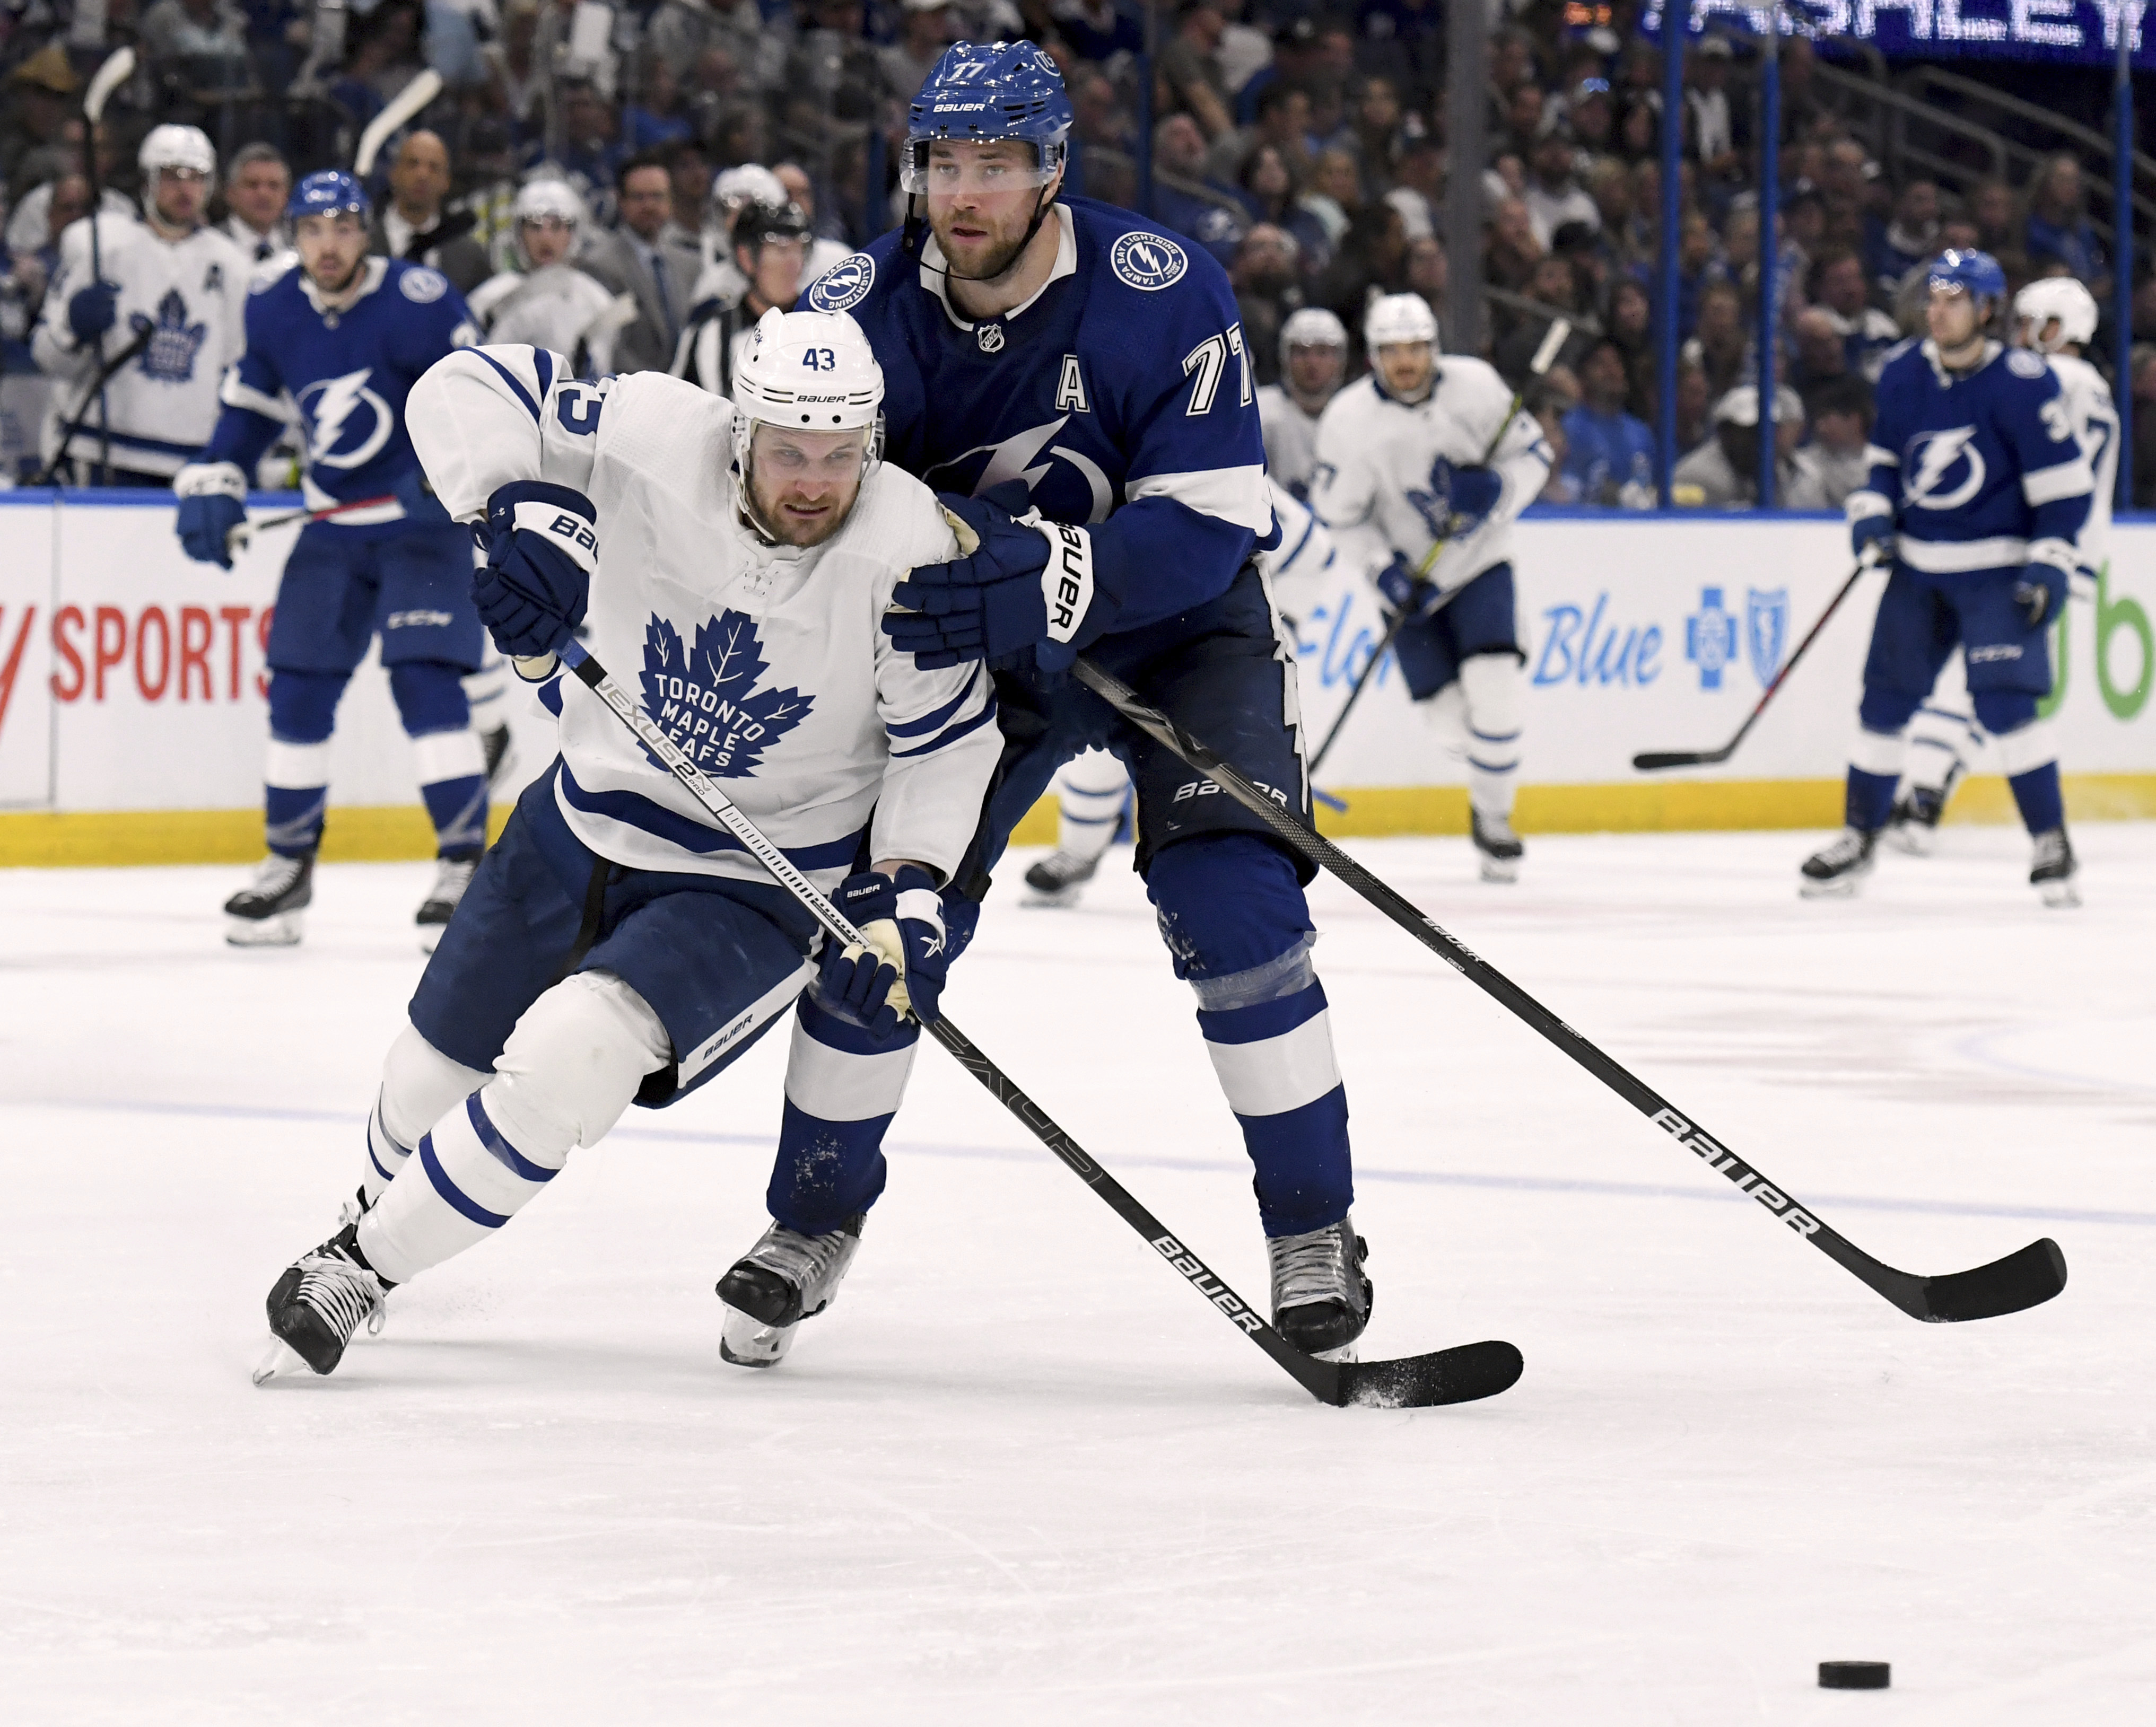 Maple Leafs Simmonds, Clifford fined by NHL for actions vs. Lightning